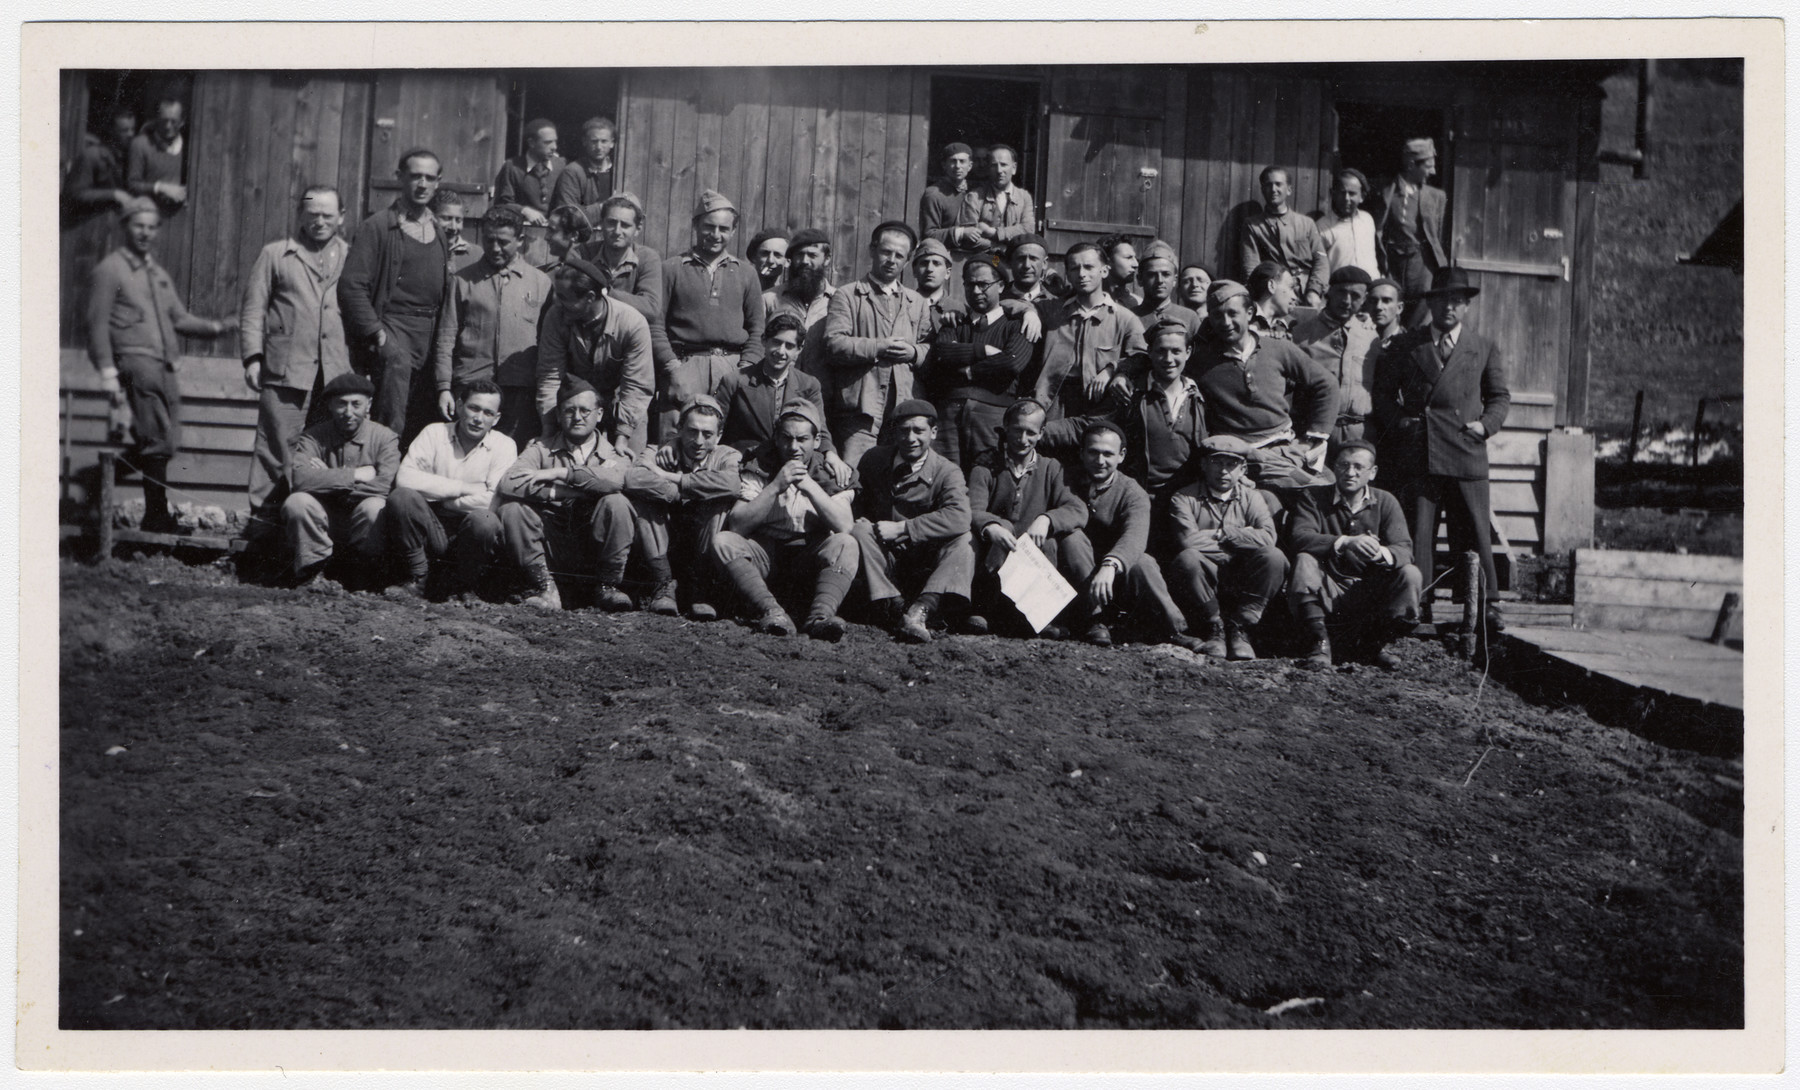 Group portrait of Jewish internees in an unidentified Swiss labor camp.

Max Schattner is standing in the middle with a black cap and light jacket, clasping his hands in front of his chest.